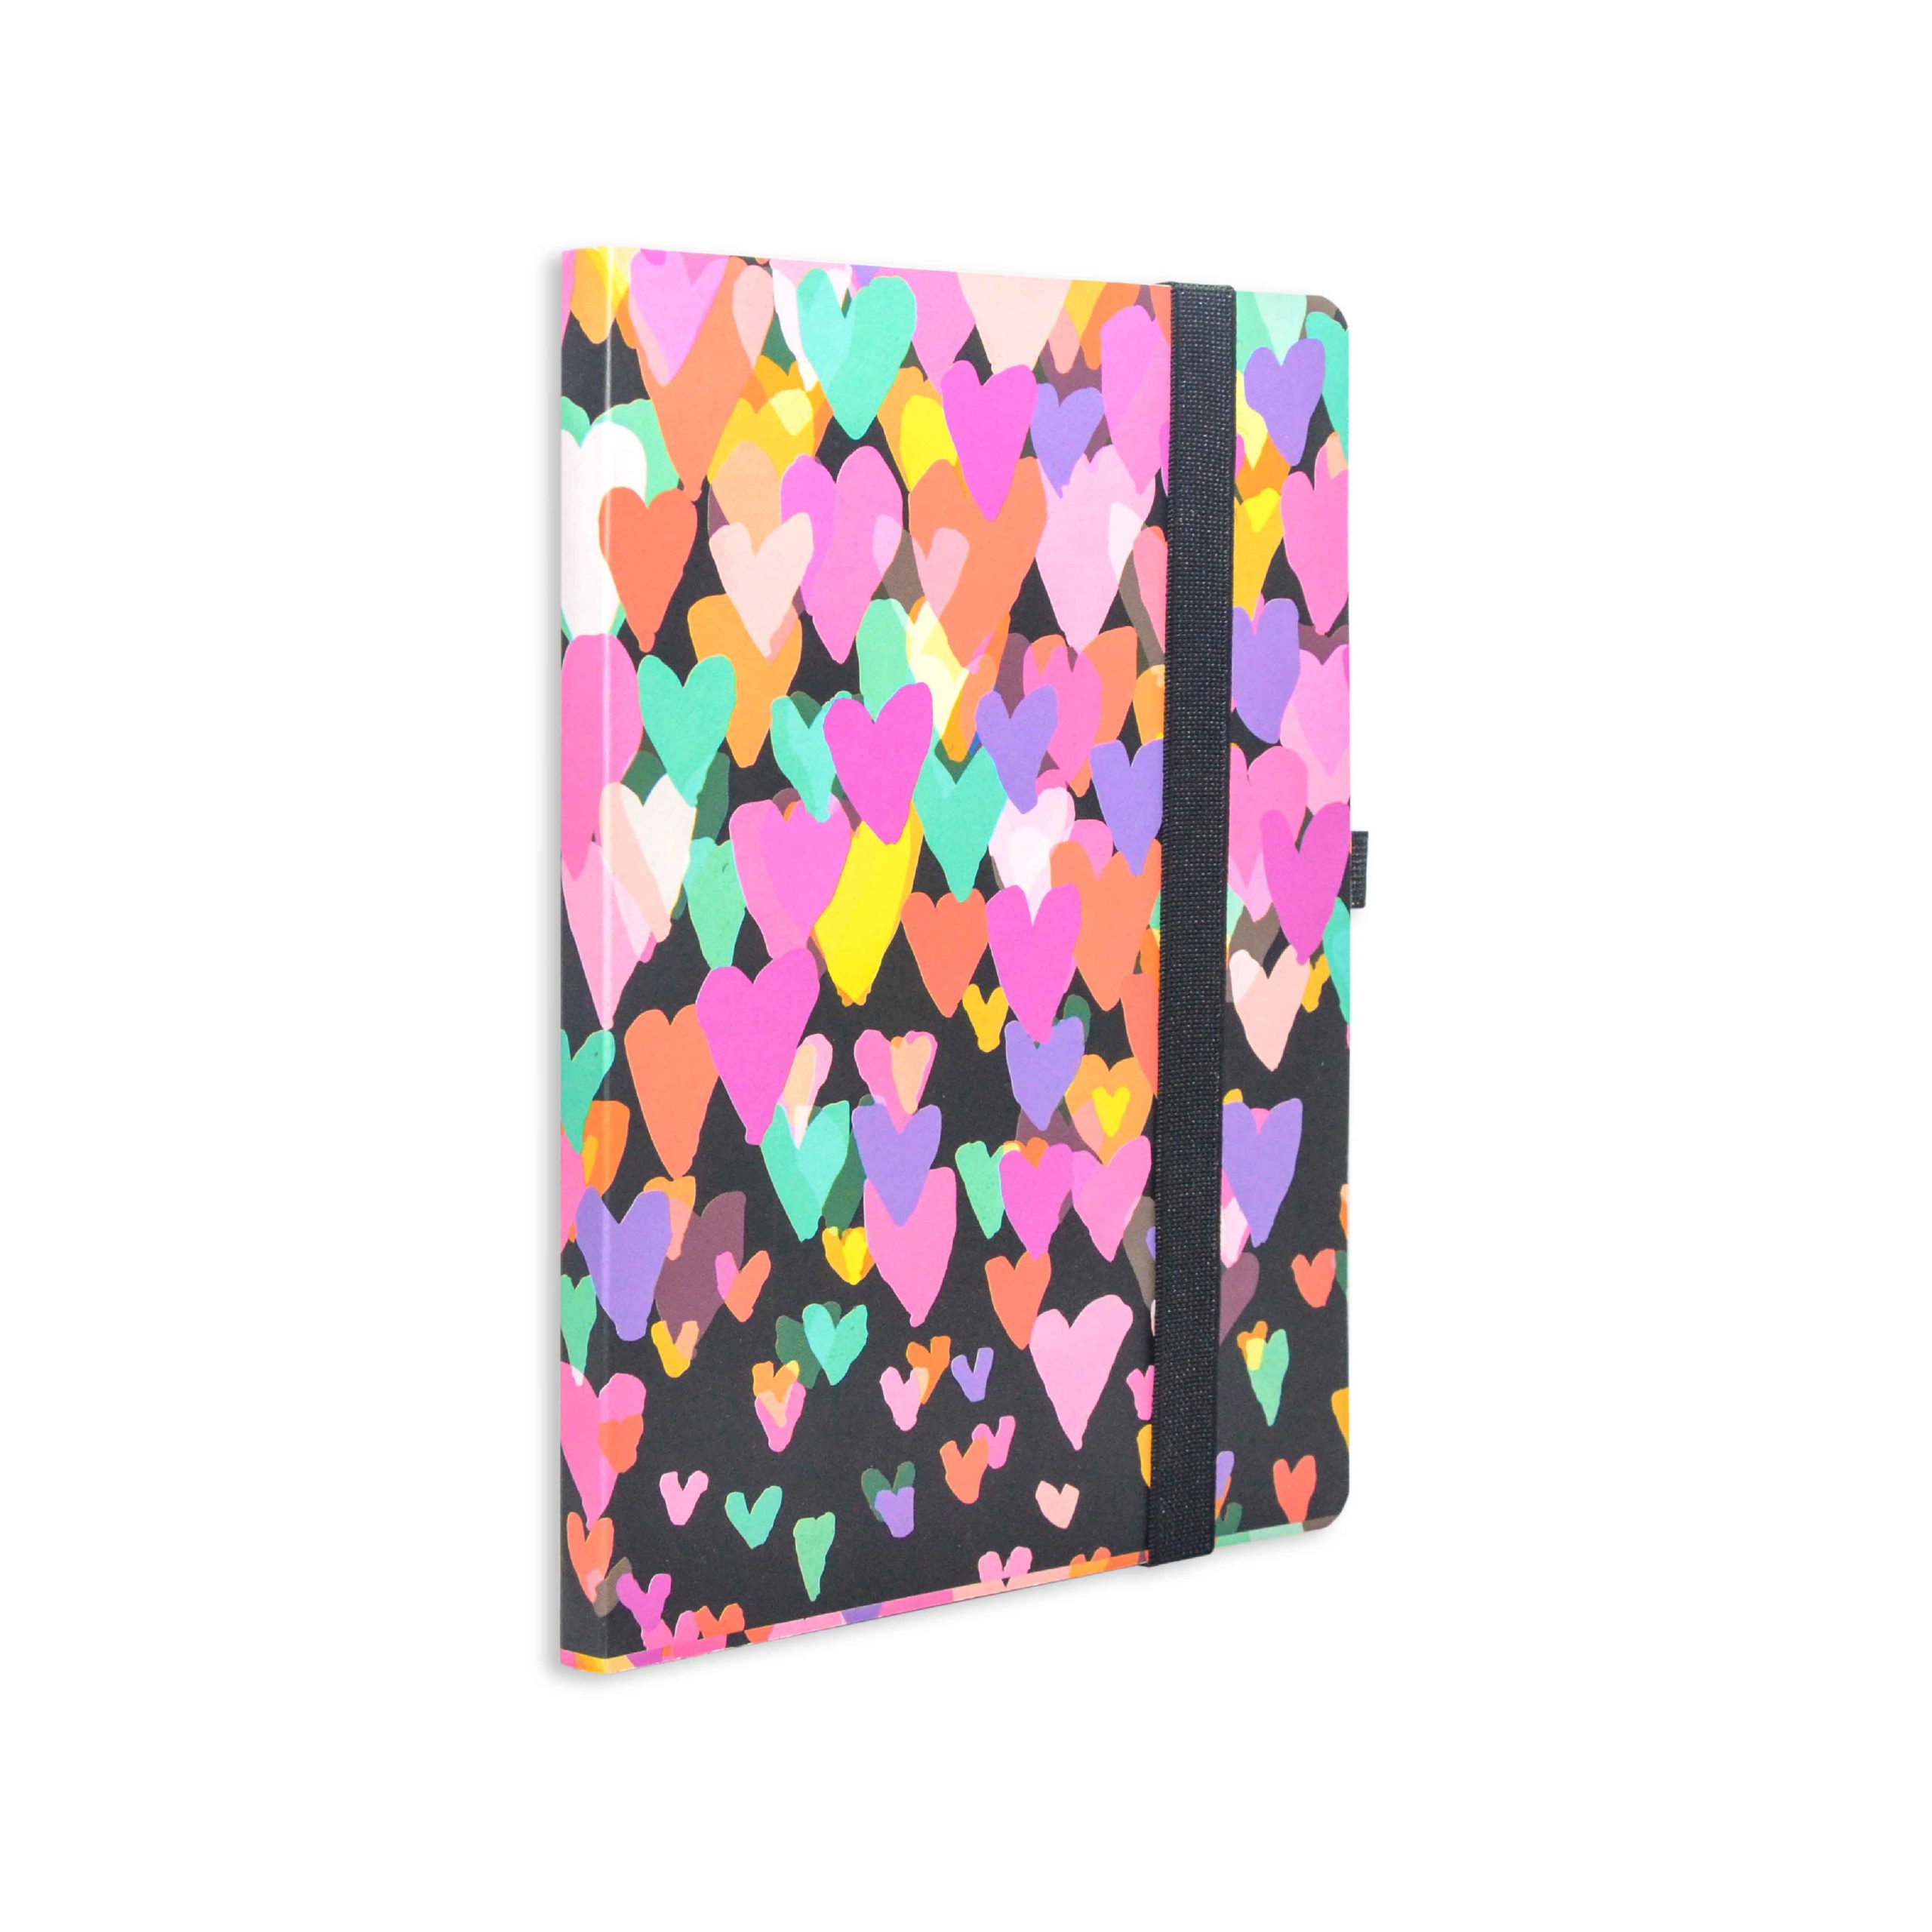 ST1397 Rainbow Hearts A5 Journal 160P 01 scaled